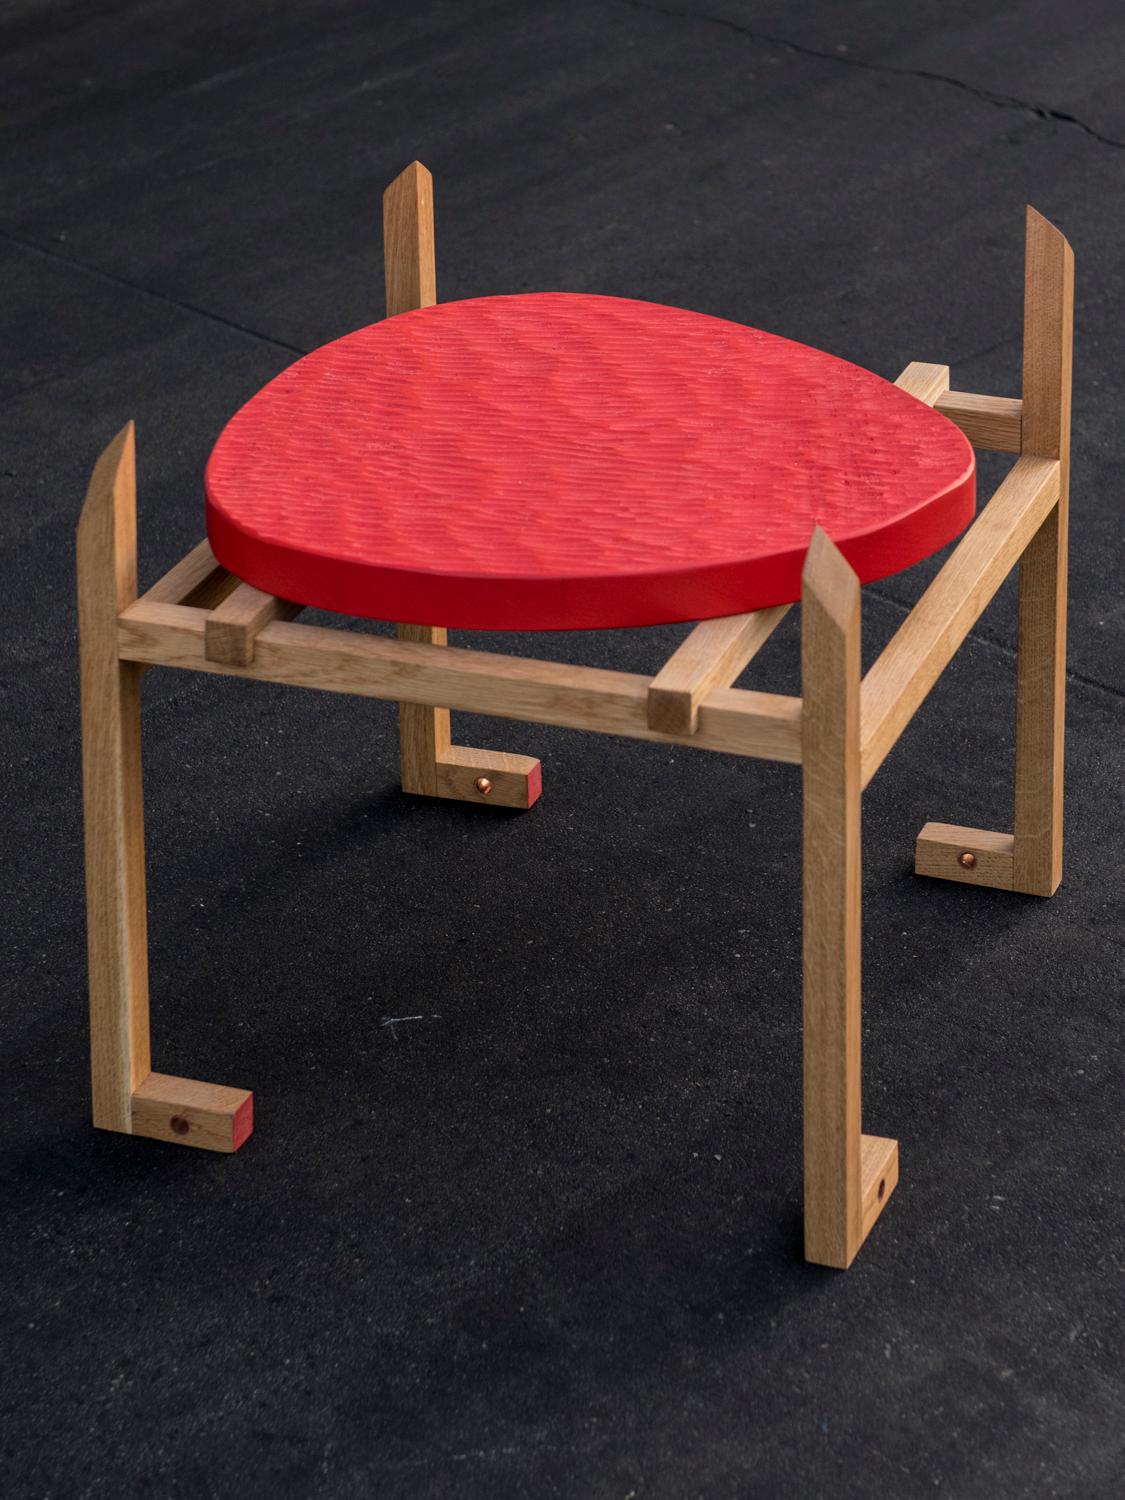 Strawberry table by Luke Malaney
Dimensions: H 35.5 x D 35.5 x W 40.7 cm
Materials: Oak, maple, copper
Natural oil/wax finish

Luke Malaney designs and creates one of a kind pieces of furniture that are made to last. Using old world joinery,